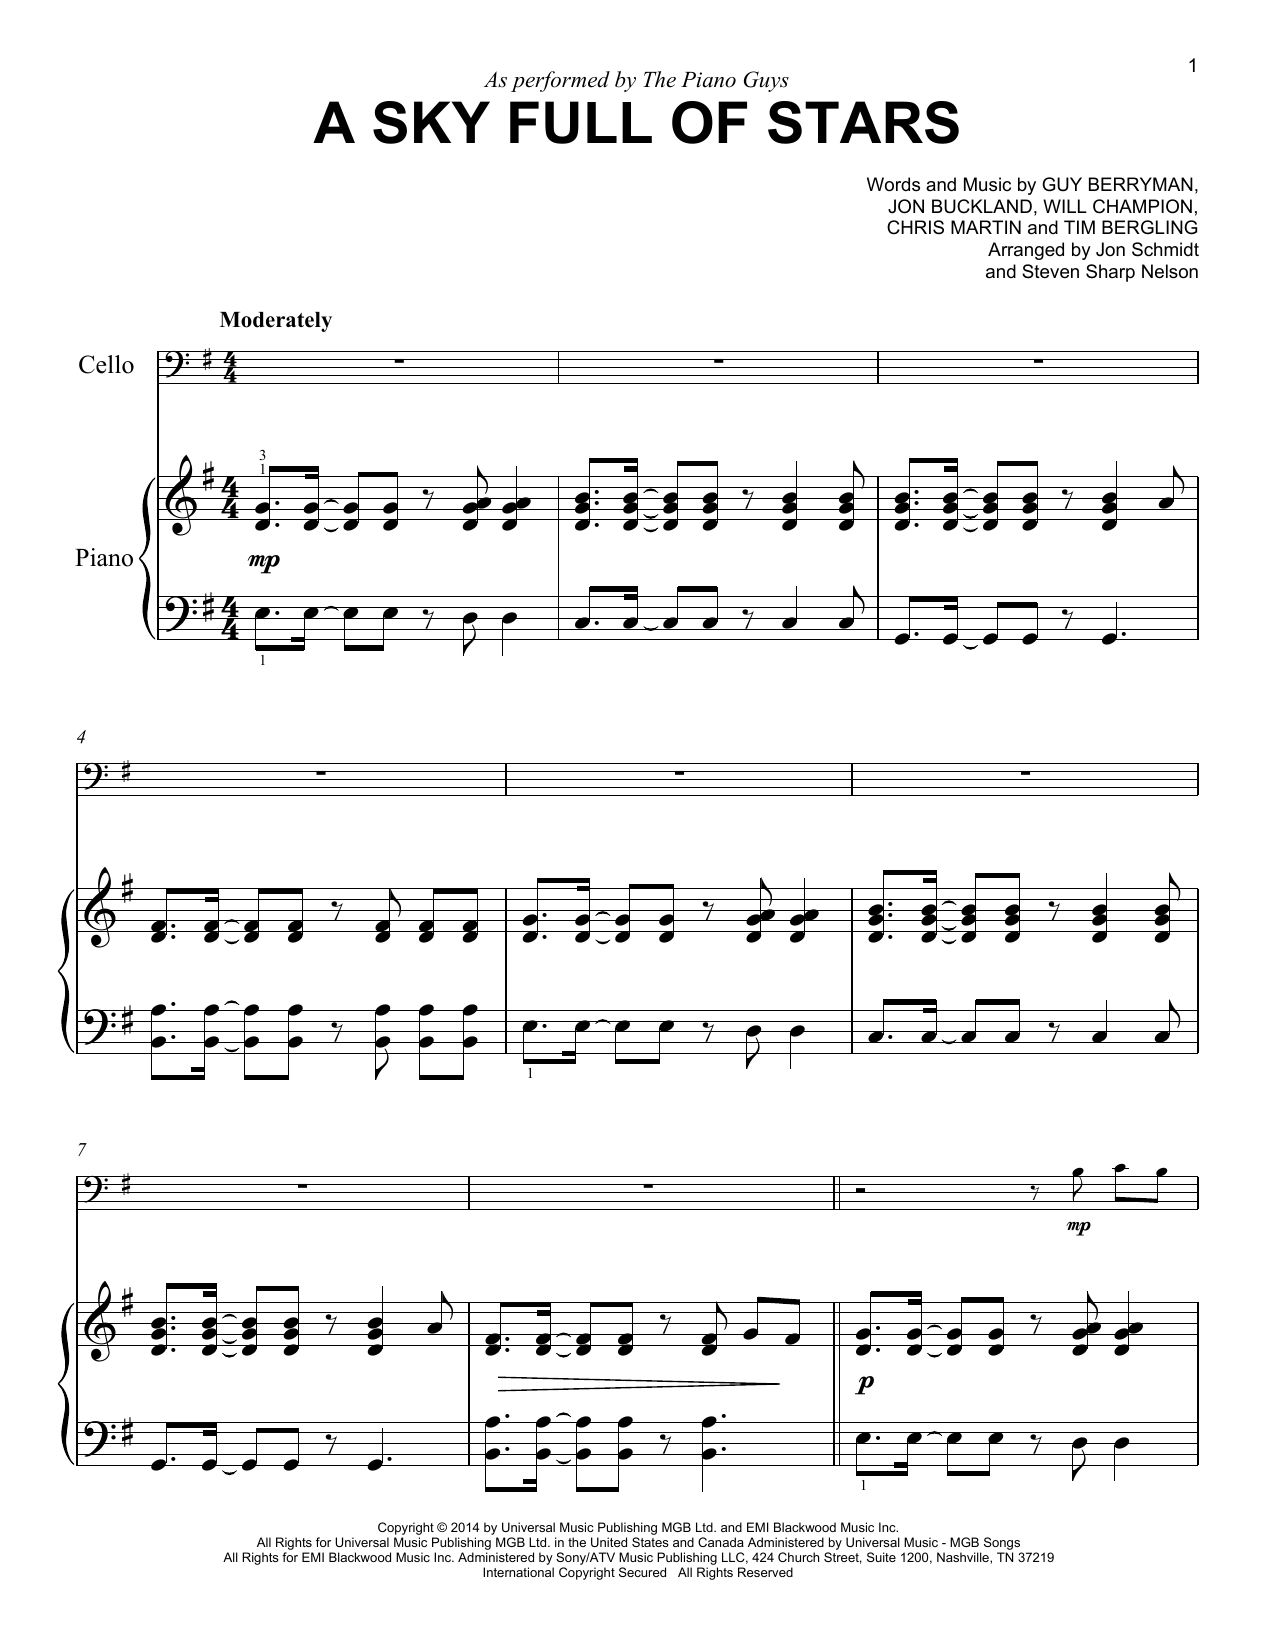 Download The Piano Guys A Sky Full Of Stars Sheet Music